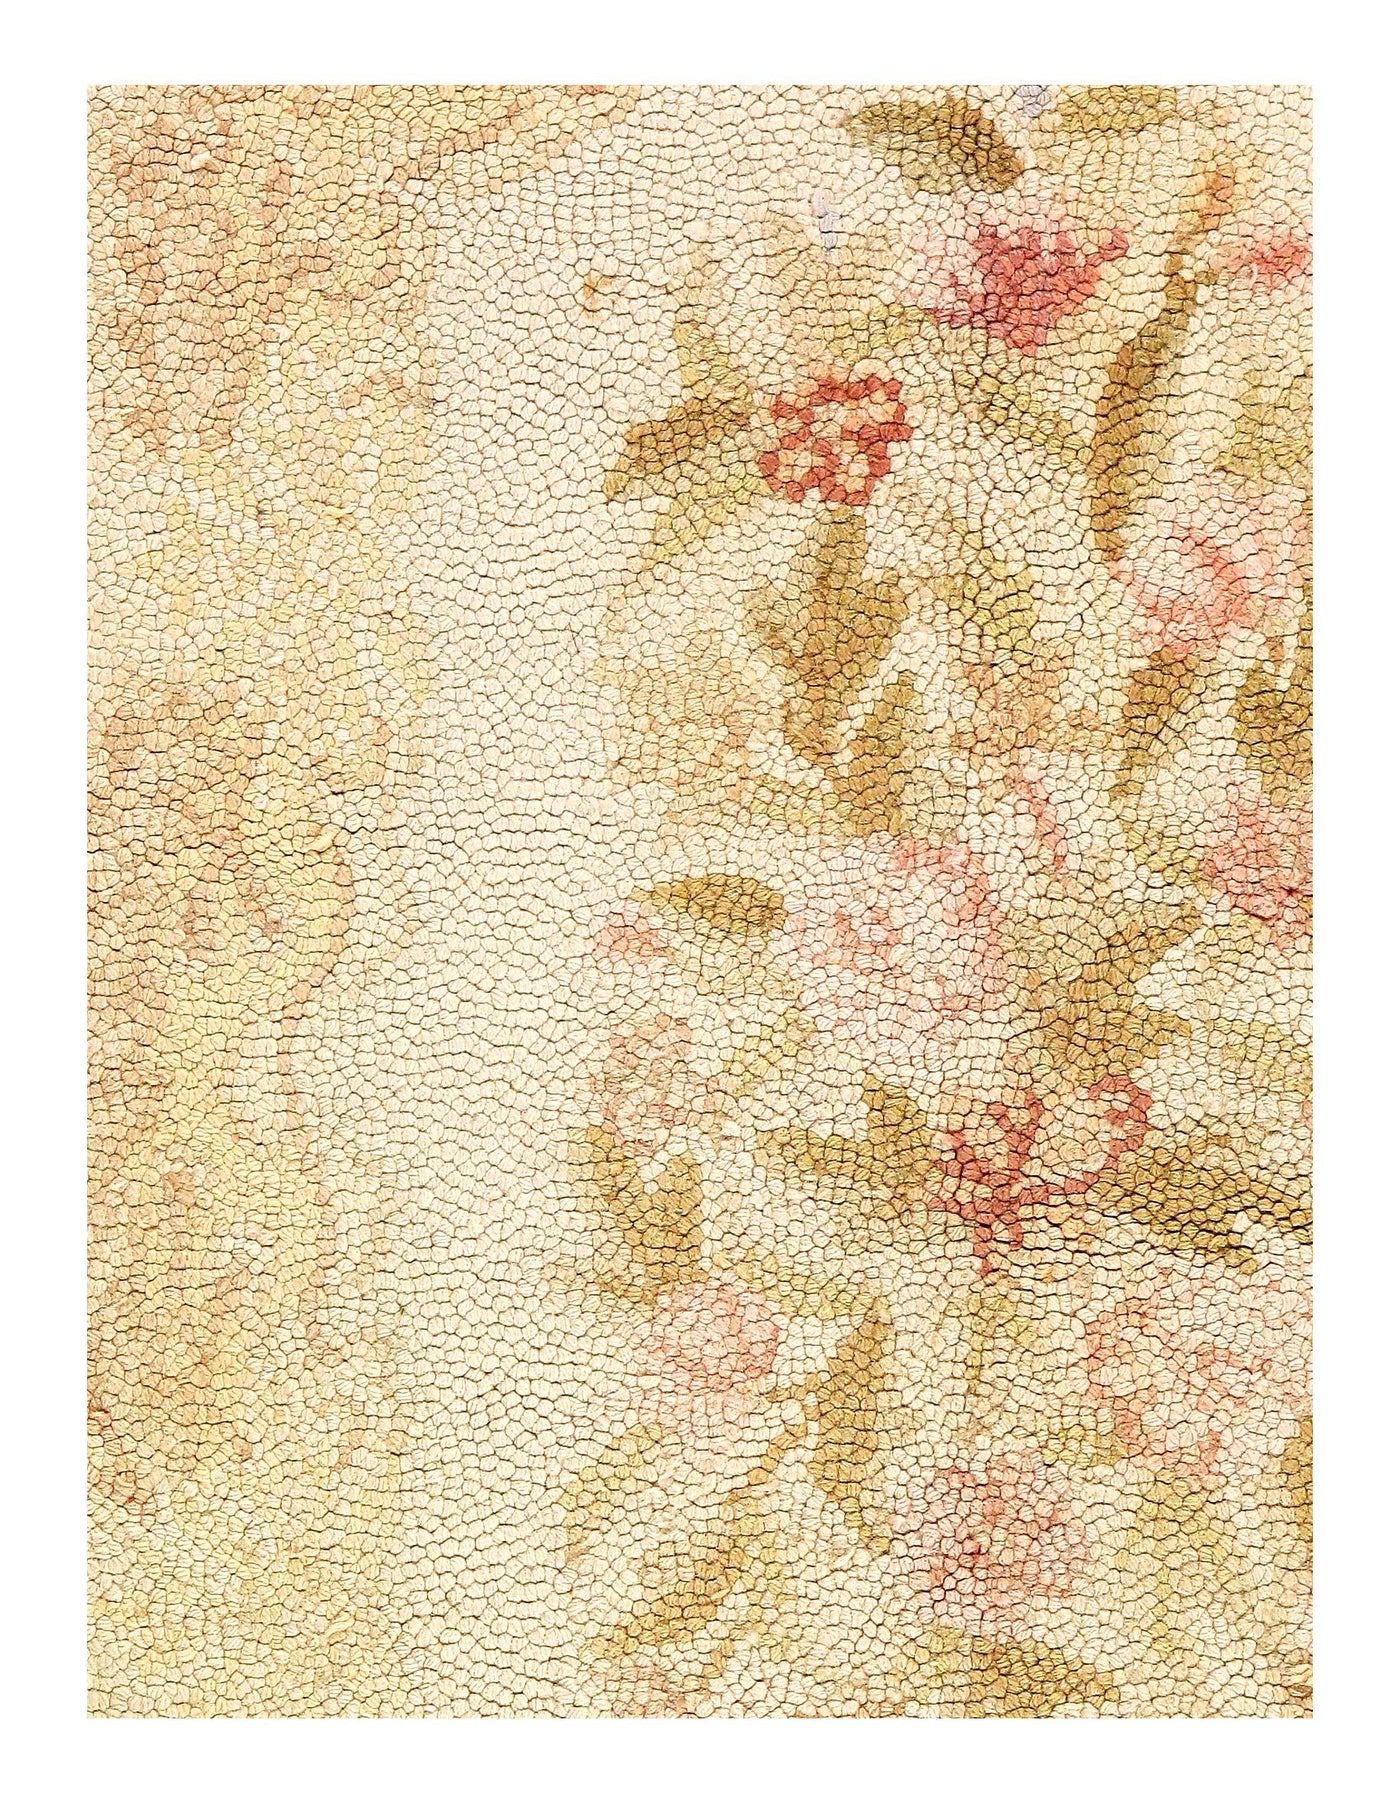 Ivory American antique Hooked Rug - 2'11'' X 4'9''